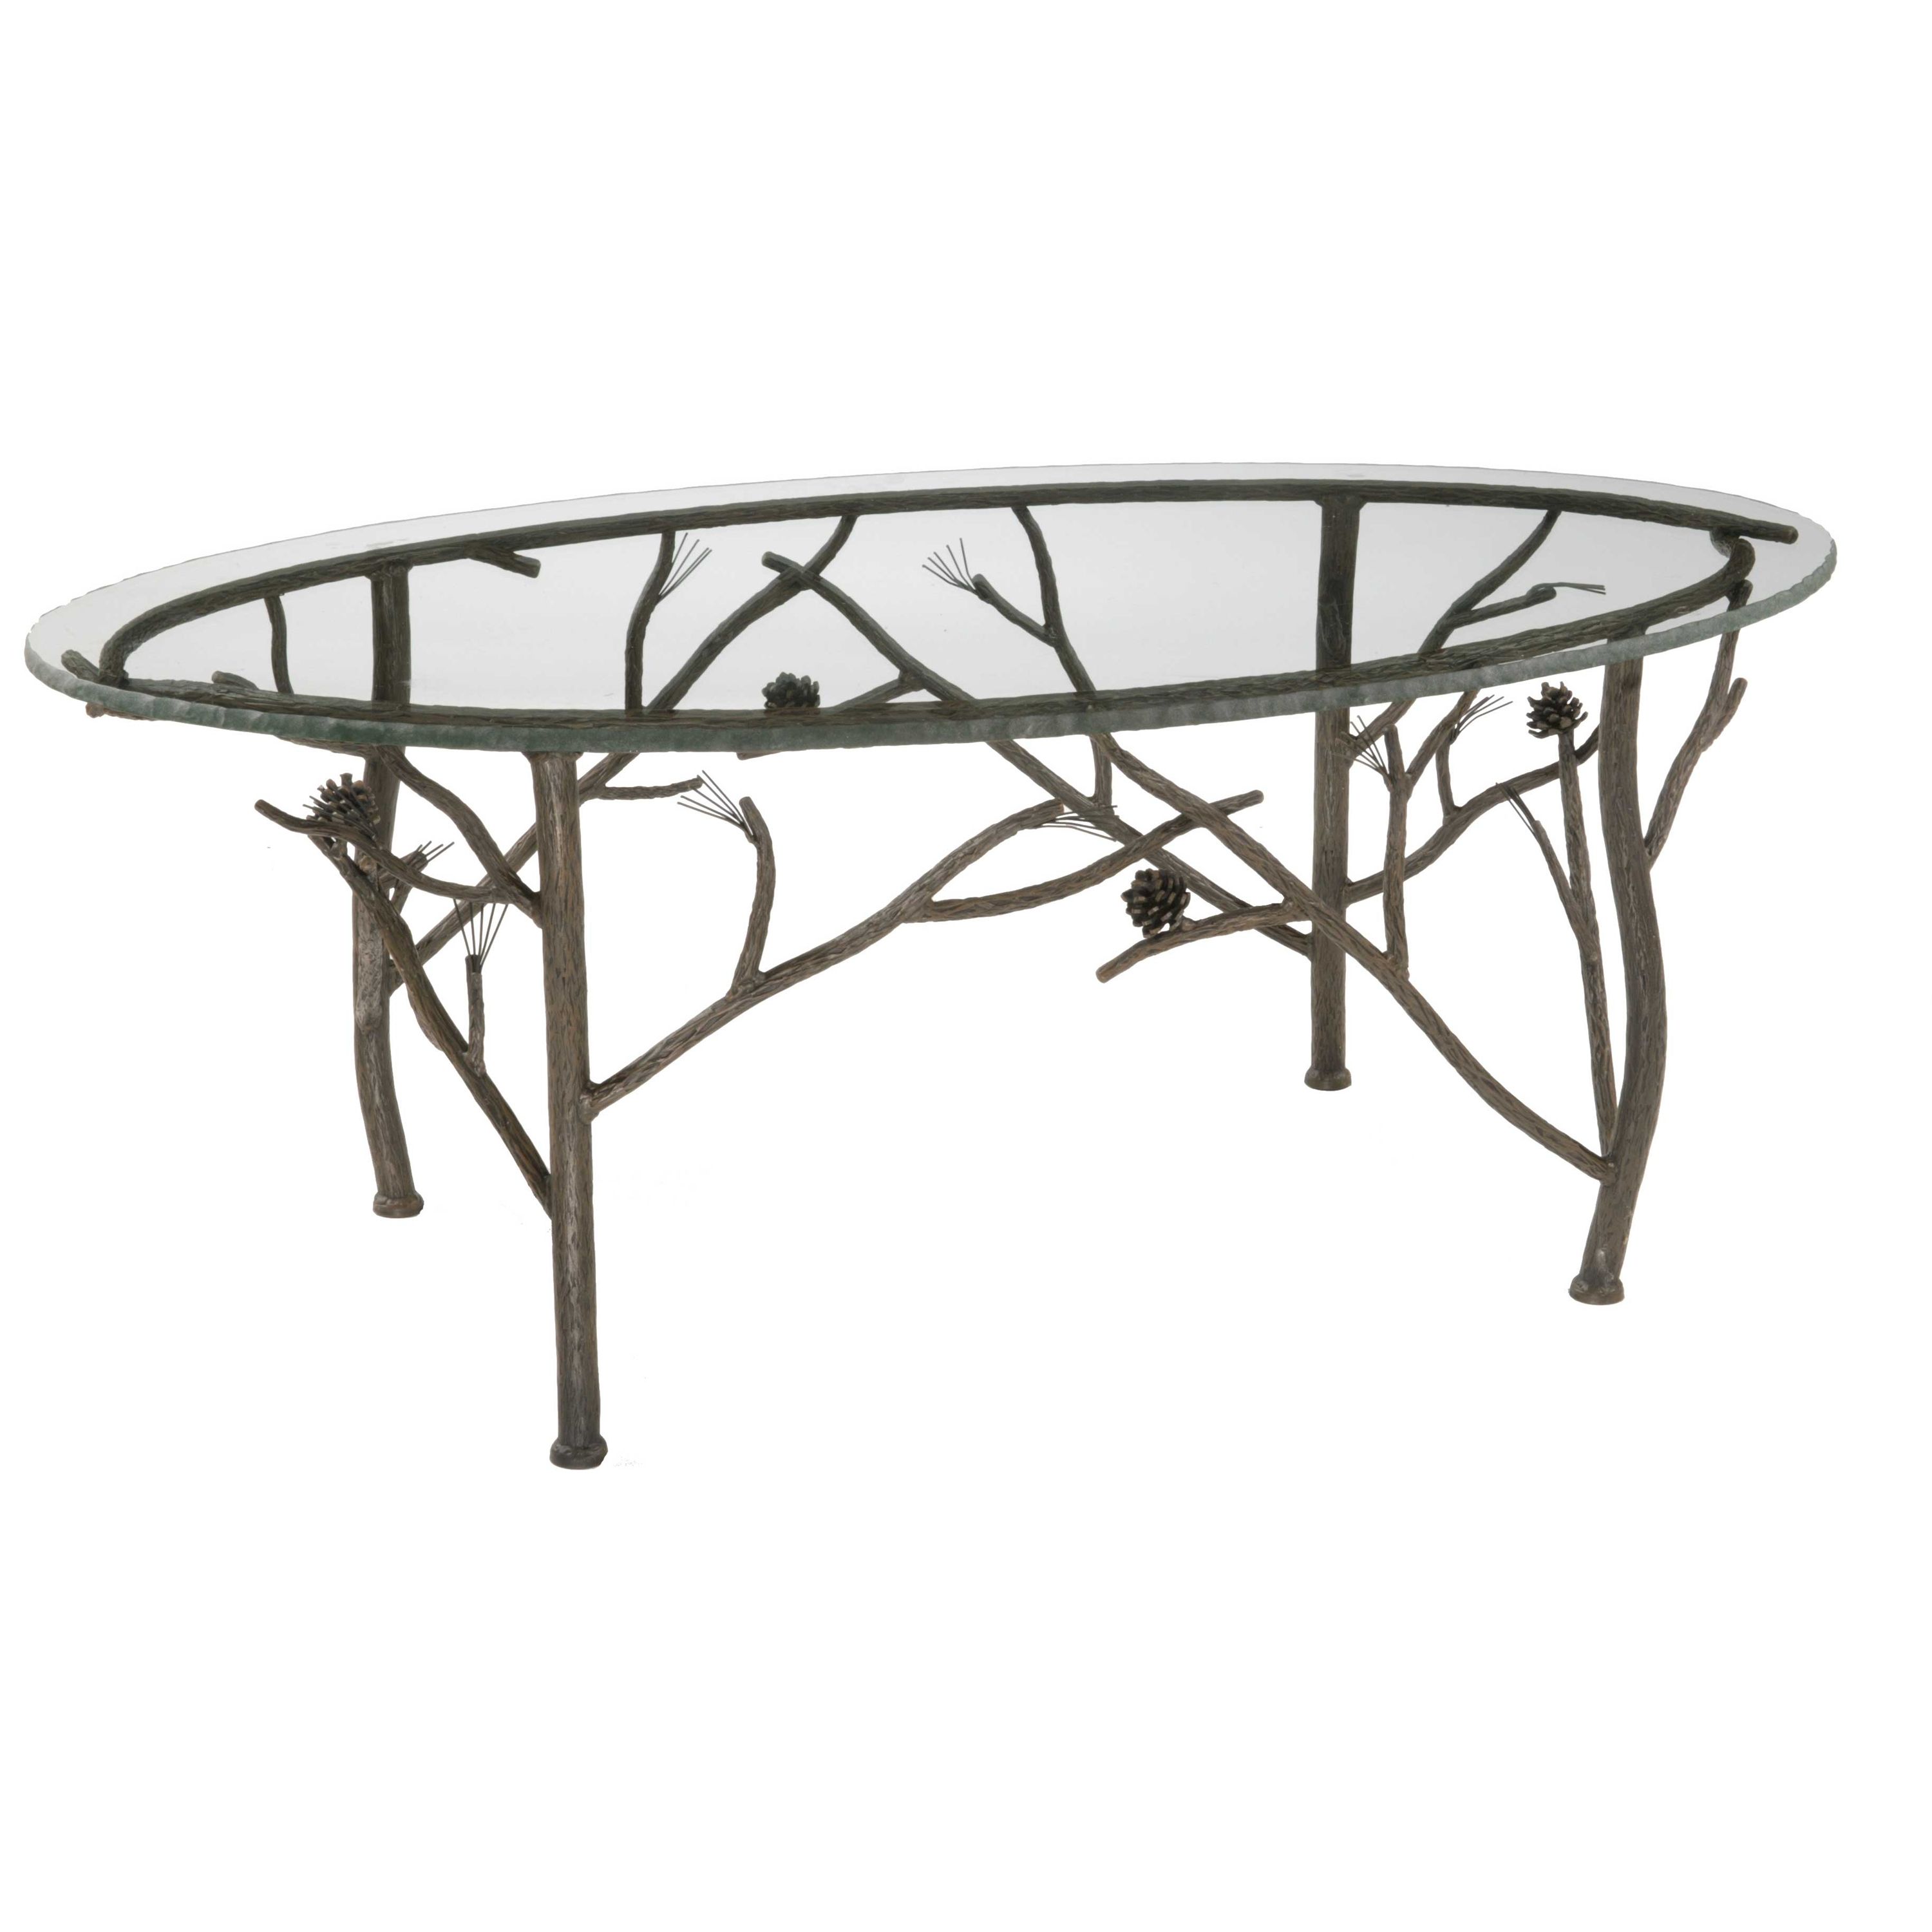 Sophisticated Glass And Wrought Iron Coffee Table Is Often Chosen By Romantic People Unique Wrought Iron Round Coffee Table (View 5 of 9)